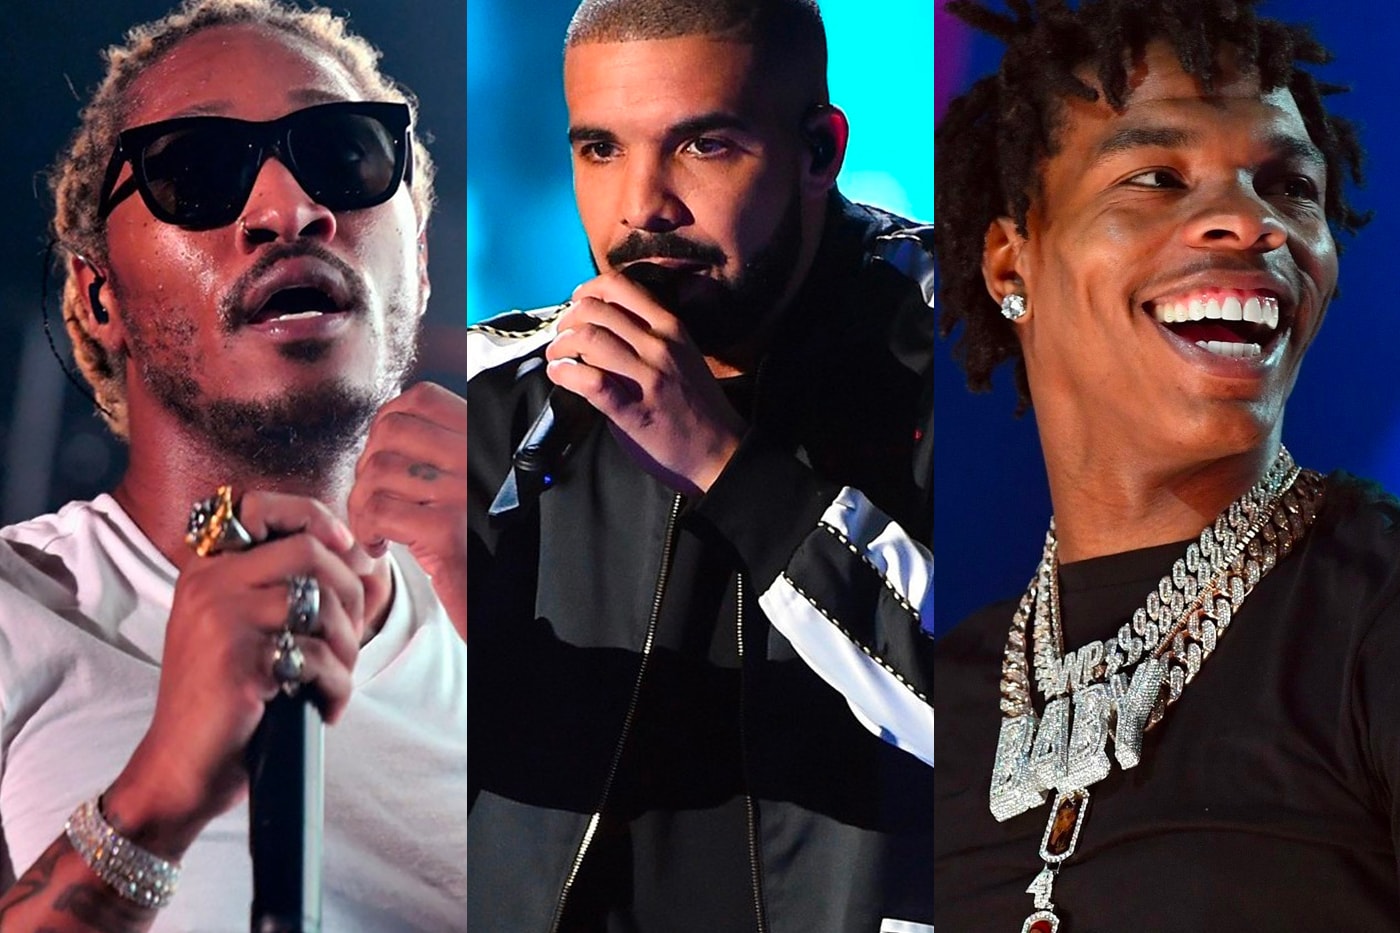 Vevo 10 Most Watched Hip Hop Videos 2020 future drake lil baby life is good lil baby 42 dugg we paid woah lil durk laugh now cry later moneybagg yo lil nas x rodeo